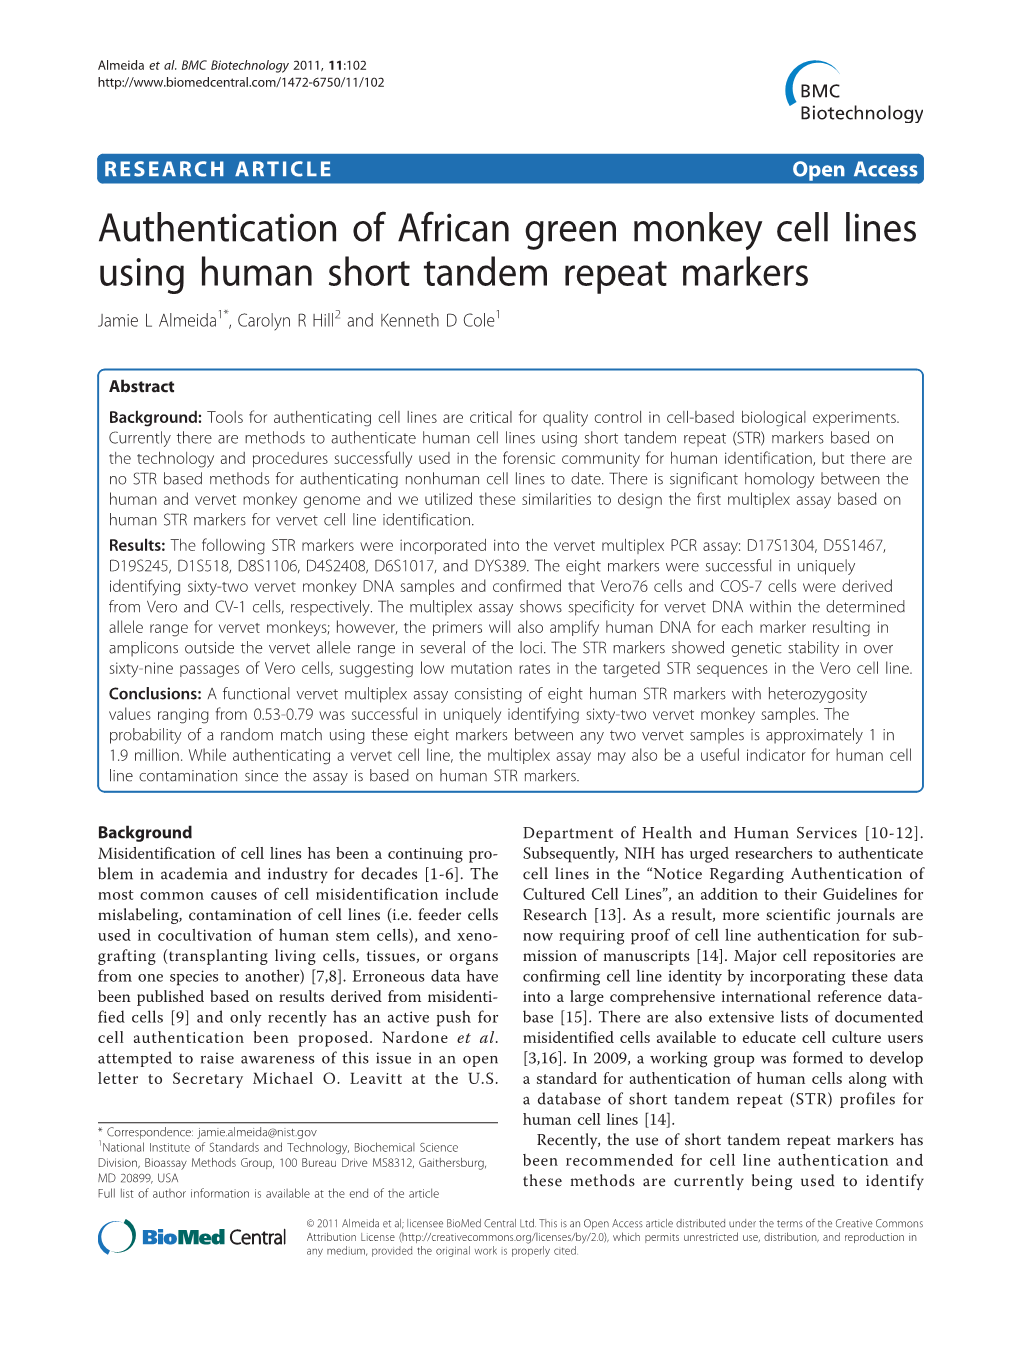 Authentication of African Green Monkey Cell Lines Using Human Short Tandem Repeat Markers Jamie L Almeida1*, Carolyn R Hill2 and Kenneth D Cole1